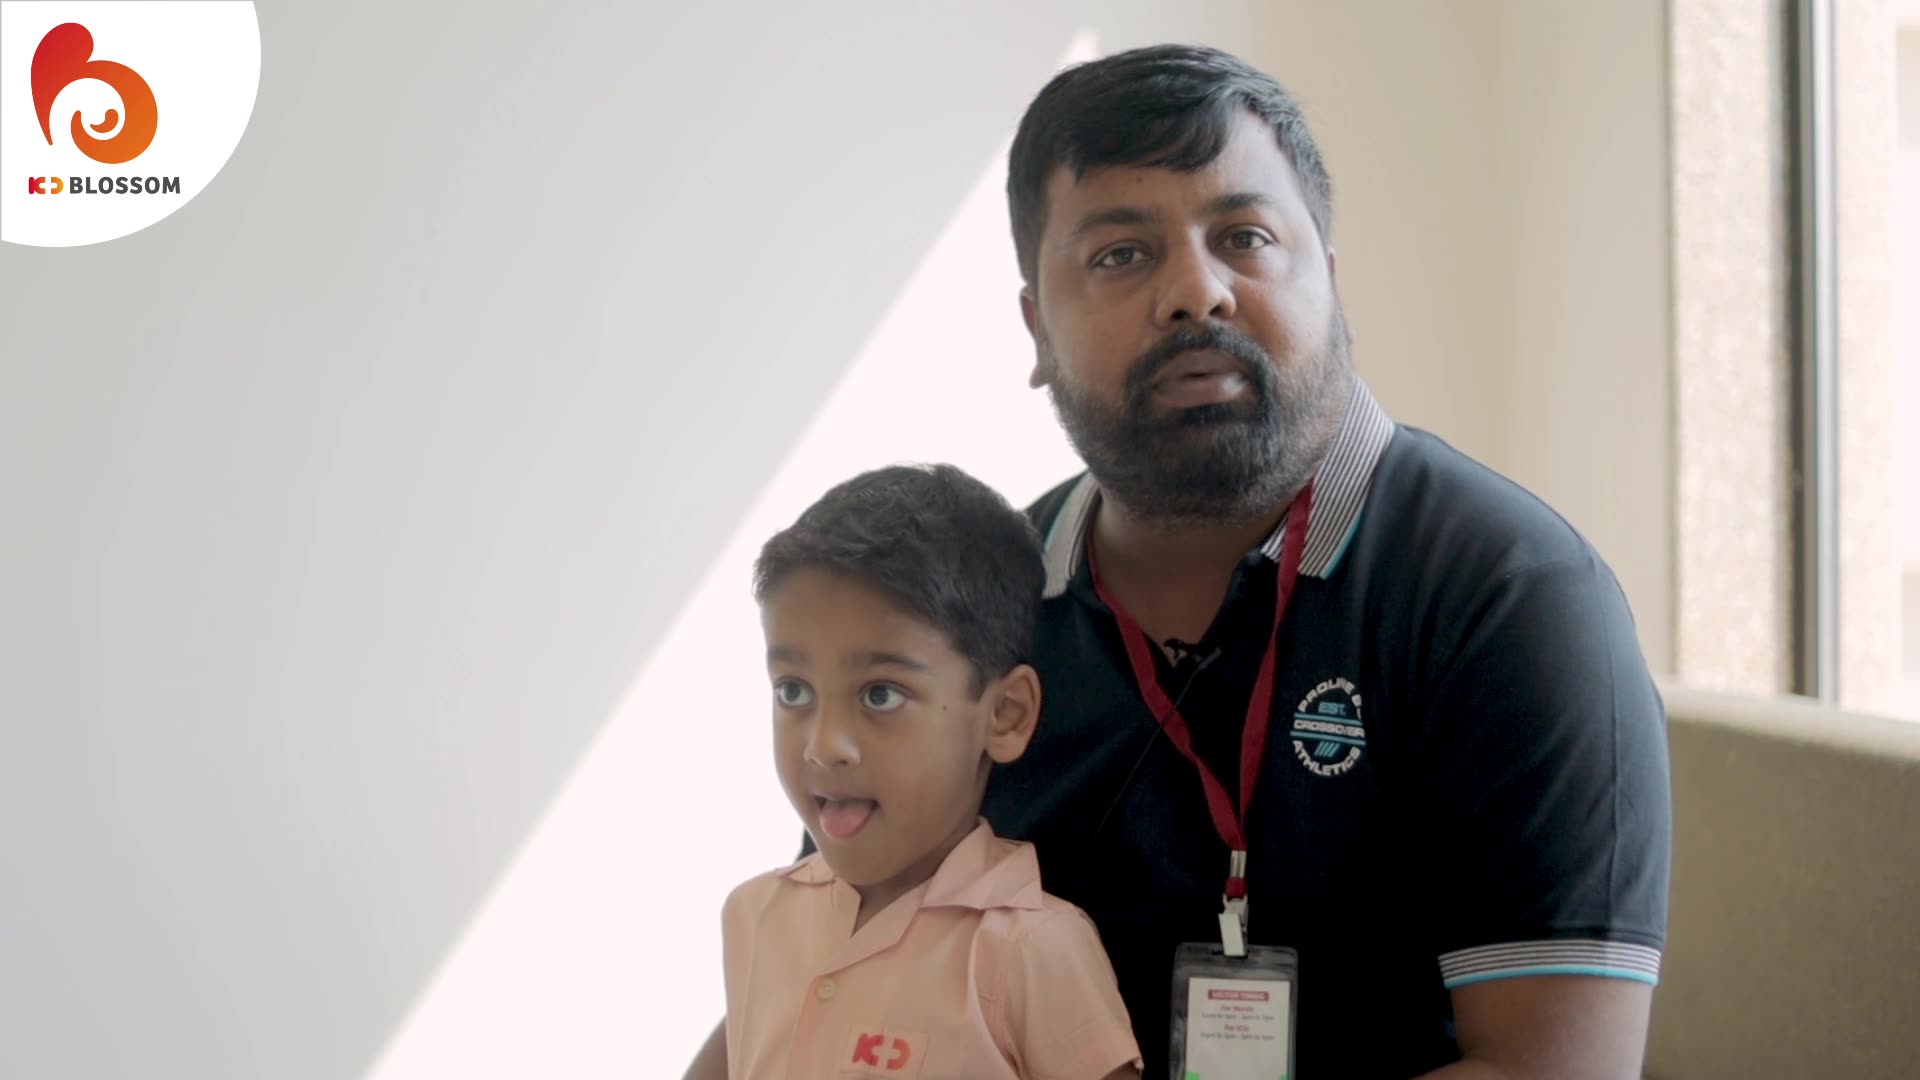 Nothing makes KD Blossom & Dr. Vishwanath Shukla happier than hearing a great patient experience.
Hear the story of little Harsh from his father, Mr. Maniyar.

#KDBlossom #KDHospital  #Paediatrician #Paediatrics #Patientcare #patienttestimonial #patient #testimonial #testimony #Awareness #wellness #goodhealth #wellnessthatworks #Nusring #NABHHospital #QualityCare #hospitals #doctors #Nurses #healthcare #medical #health #Ahmedabad #Gujarat #India